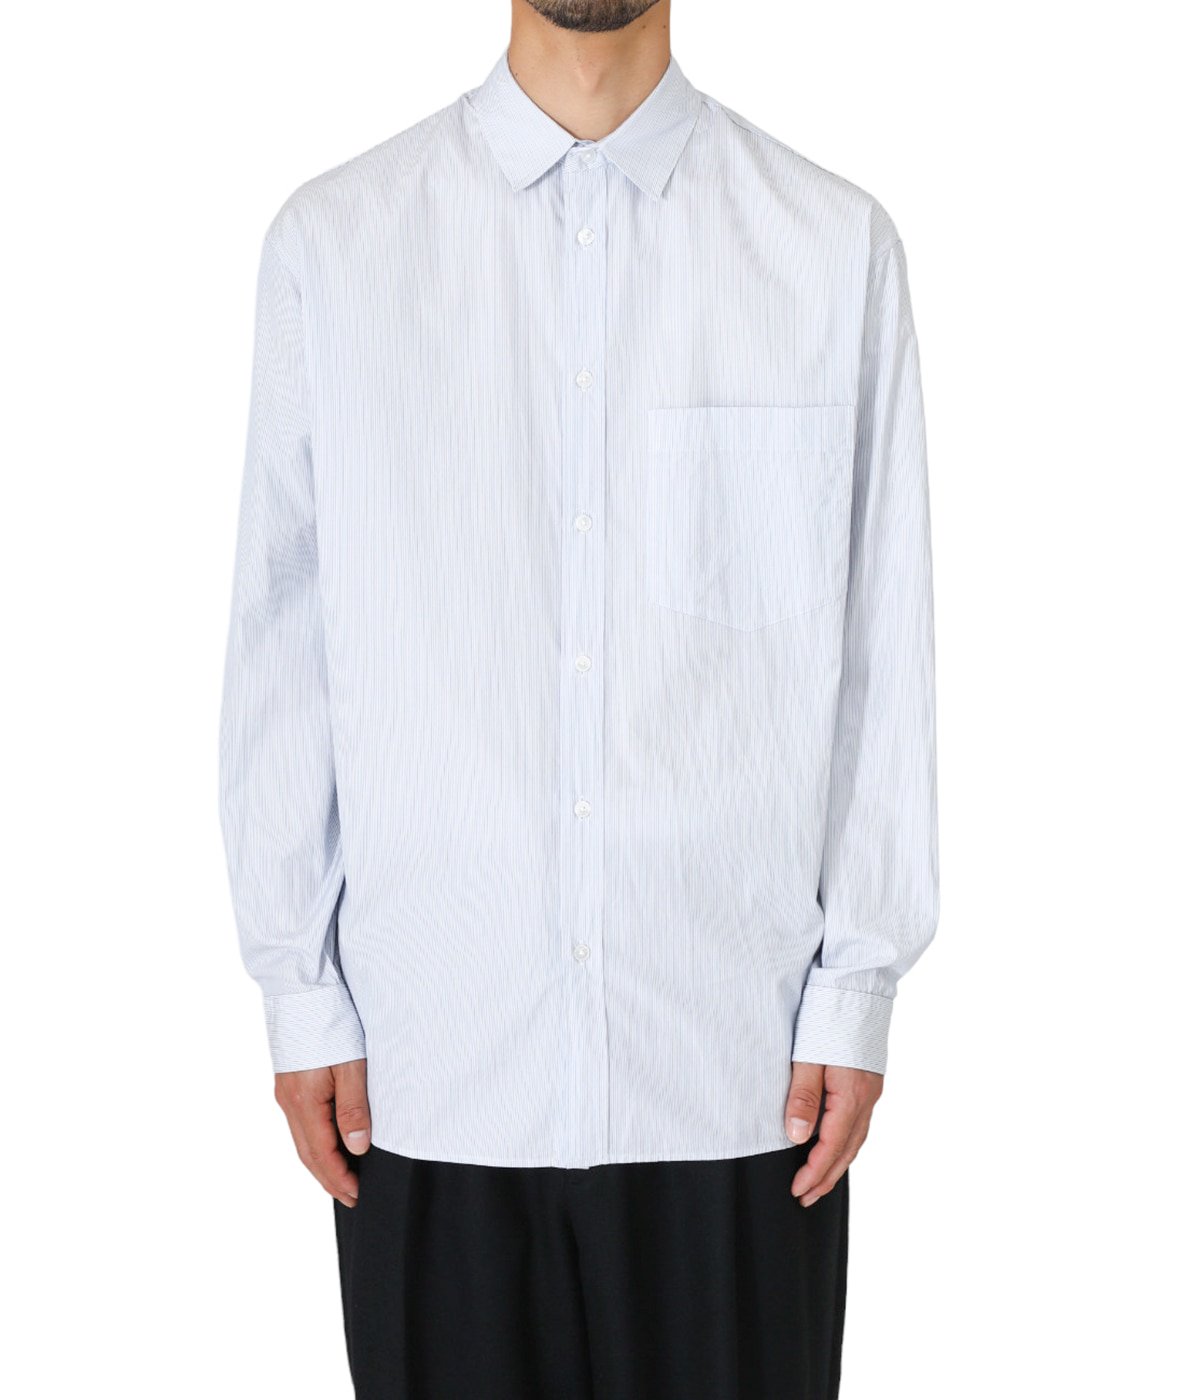 CLASSIC SHIRT(RELAX FIT) | The CLASIK(ザ クラシック) / トップス ...